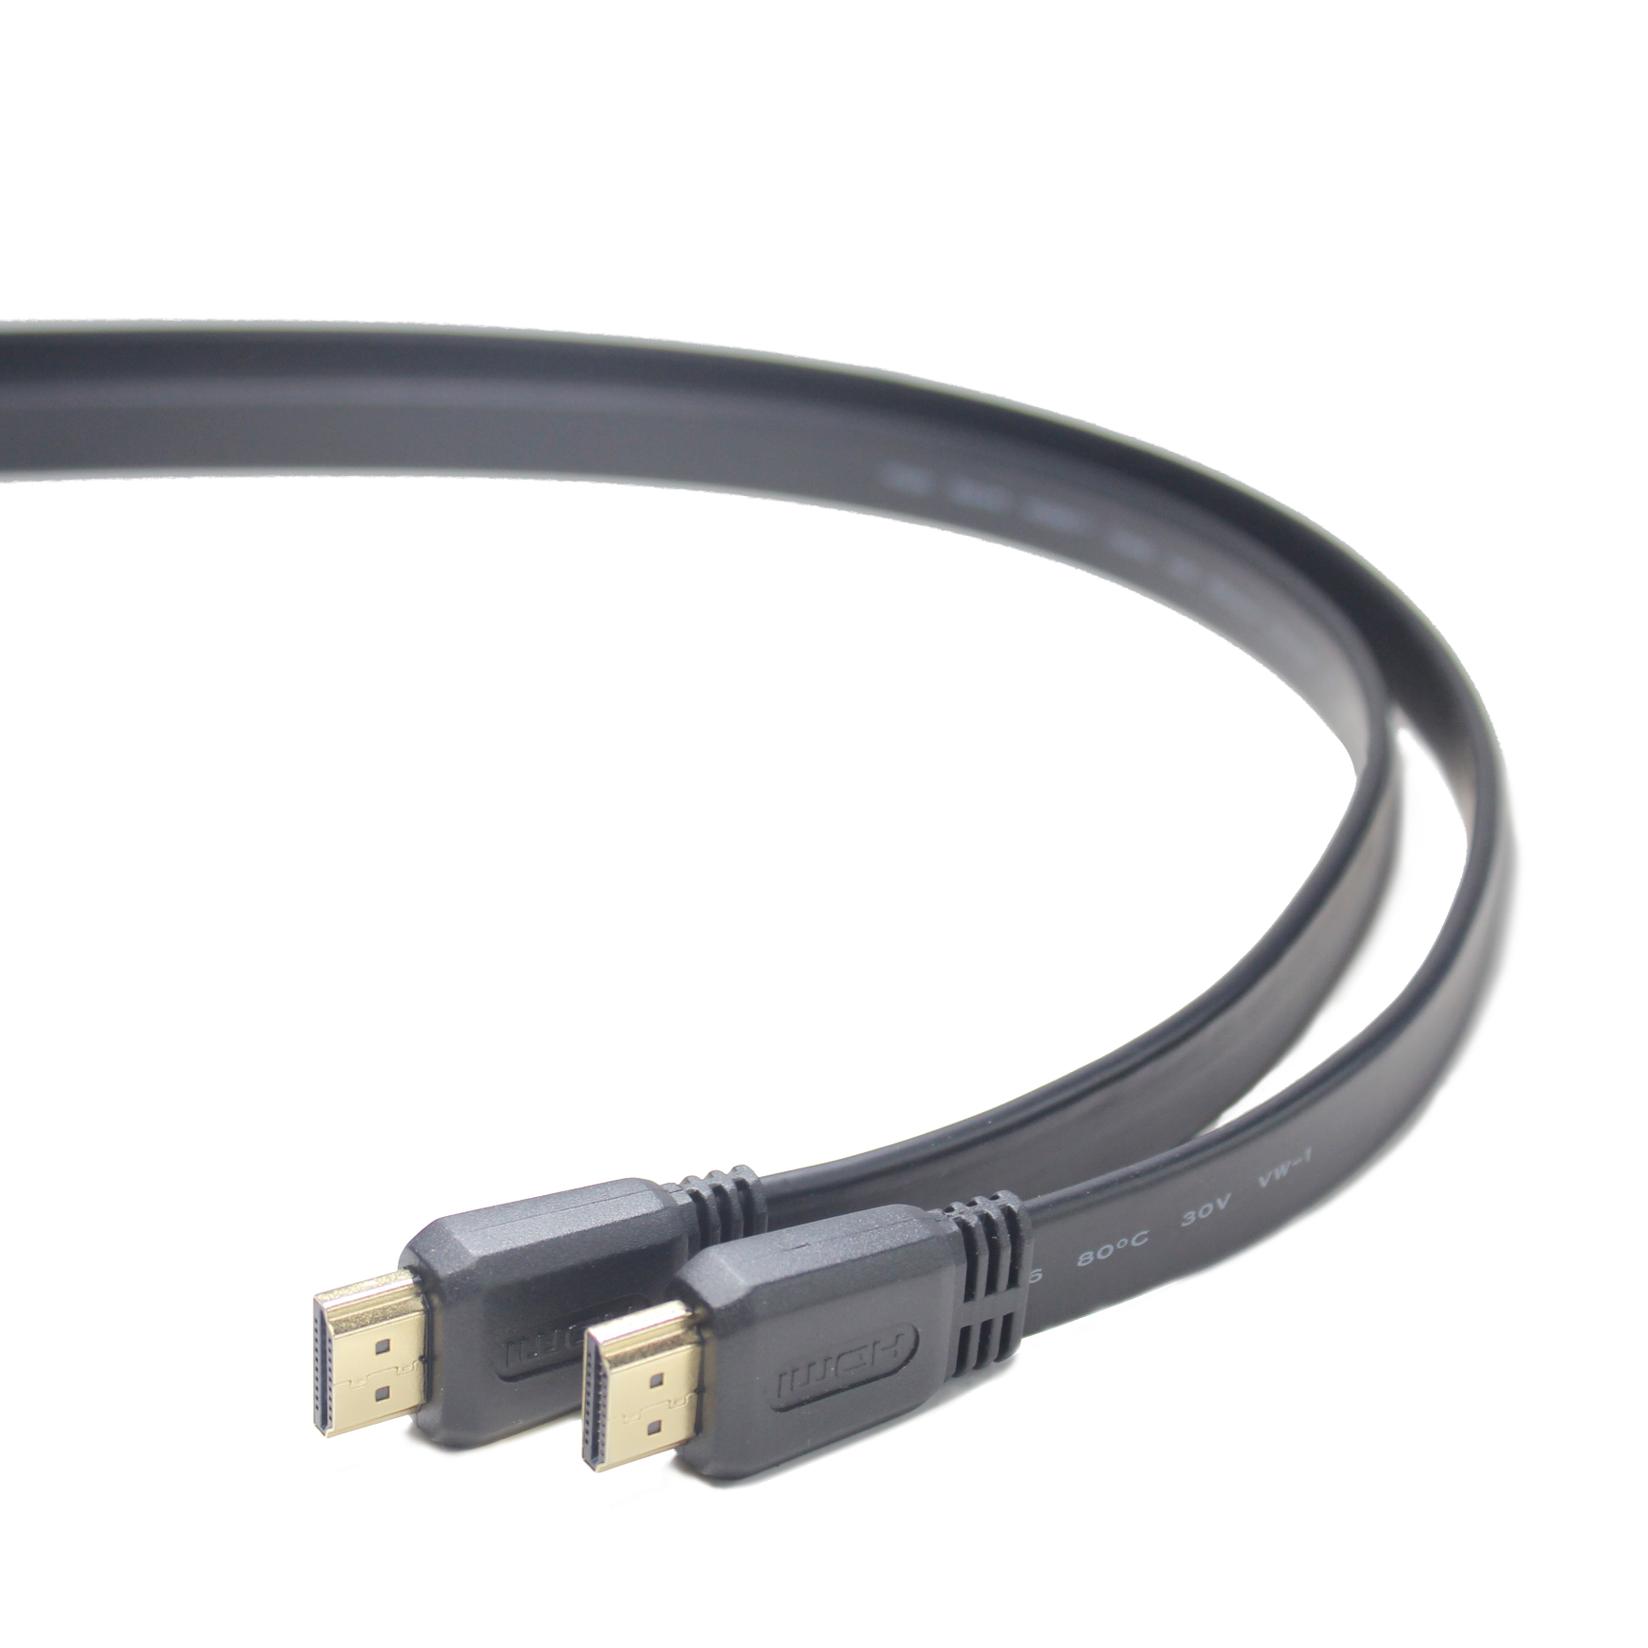 Selected image for GEMBIRD HDMI kabl 1,8 m HDMI tip A (Standardni) Crni